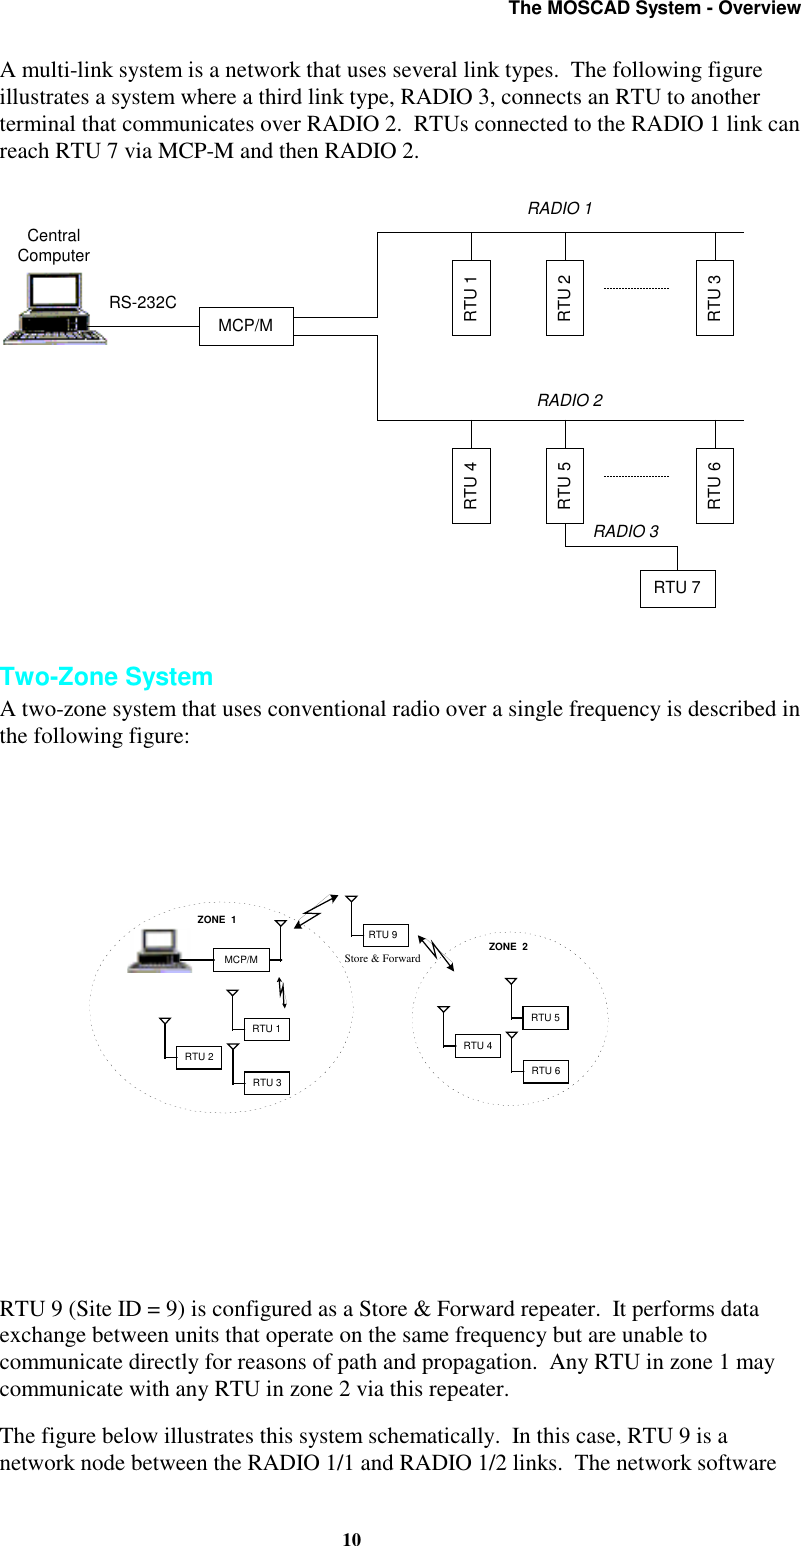 The MOSCAD System - Overview10A multi-link system is a network that uses several link types. The following figureillustrates a system where a third link type, RADIO 3, connects an RTU to anotherterminal that communicates over RADIO 2. RTUs connected to the RADIO 1 link canreach RTU 7 via MCP-M and then RADIO 2.MCP/MCentralComputerRTU 4RTU 5RTU 6RS-232CRADIO 1RTU 1RTU 2RTU 3RADIO 2RTU 7RADIO 3Two-Zone SystemA two-zone system that uses conventional radio over a single frequency is described inthe following figure:ZONE 2MCP/MRTU 9RTU 2RTU 1RTU 3ZONE 1RTU 4RTU 5RTU 6Store &amp; ForwardRTU 9 (Site ID = 9) is configured as a Store &amp; Forward repeater. It performs dataexchange between units that operate on the same frequency but are unable tocommunicate directly for reasons of path and propagation. Any RTU in zone 1 maycommunicate with any RTU in zone 2 via this repeater.The figure below illustrates this system schematically. In this case, RTU 9 is anetwork node between the RADIO 1/1 and RADIO 1/2 links. The network software